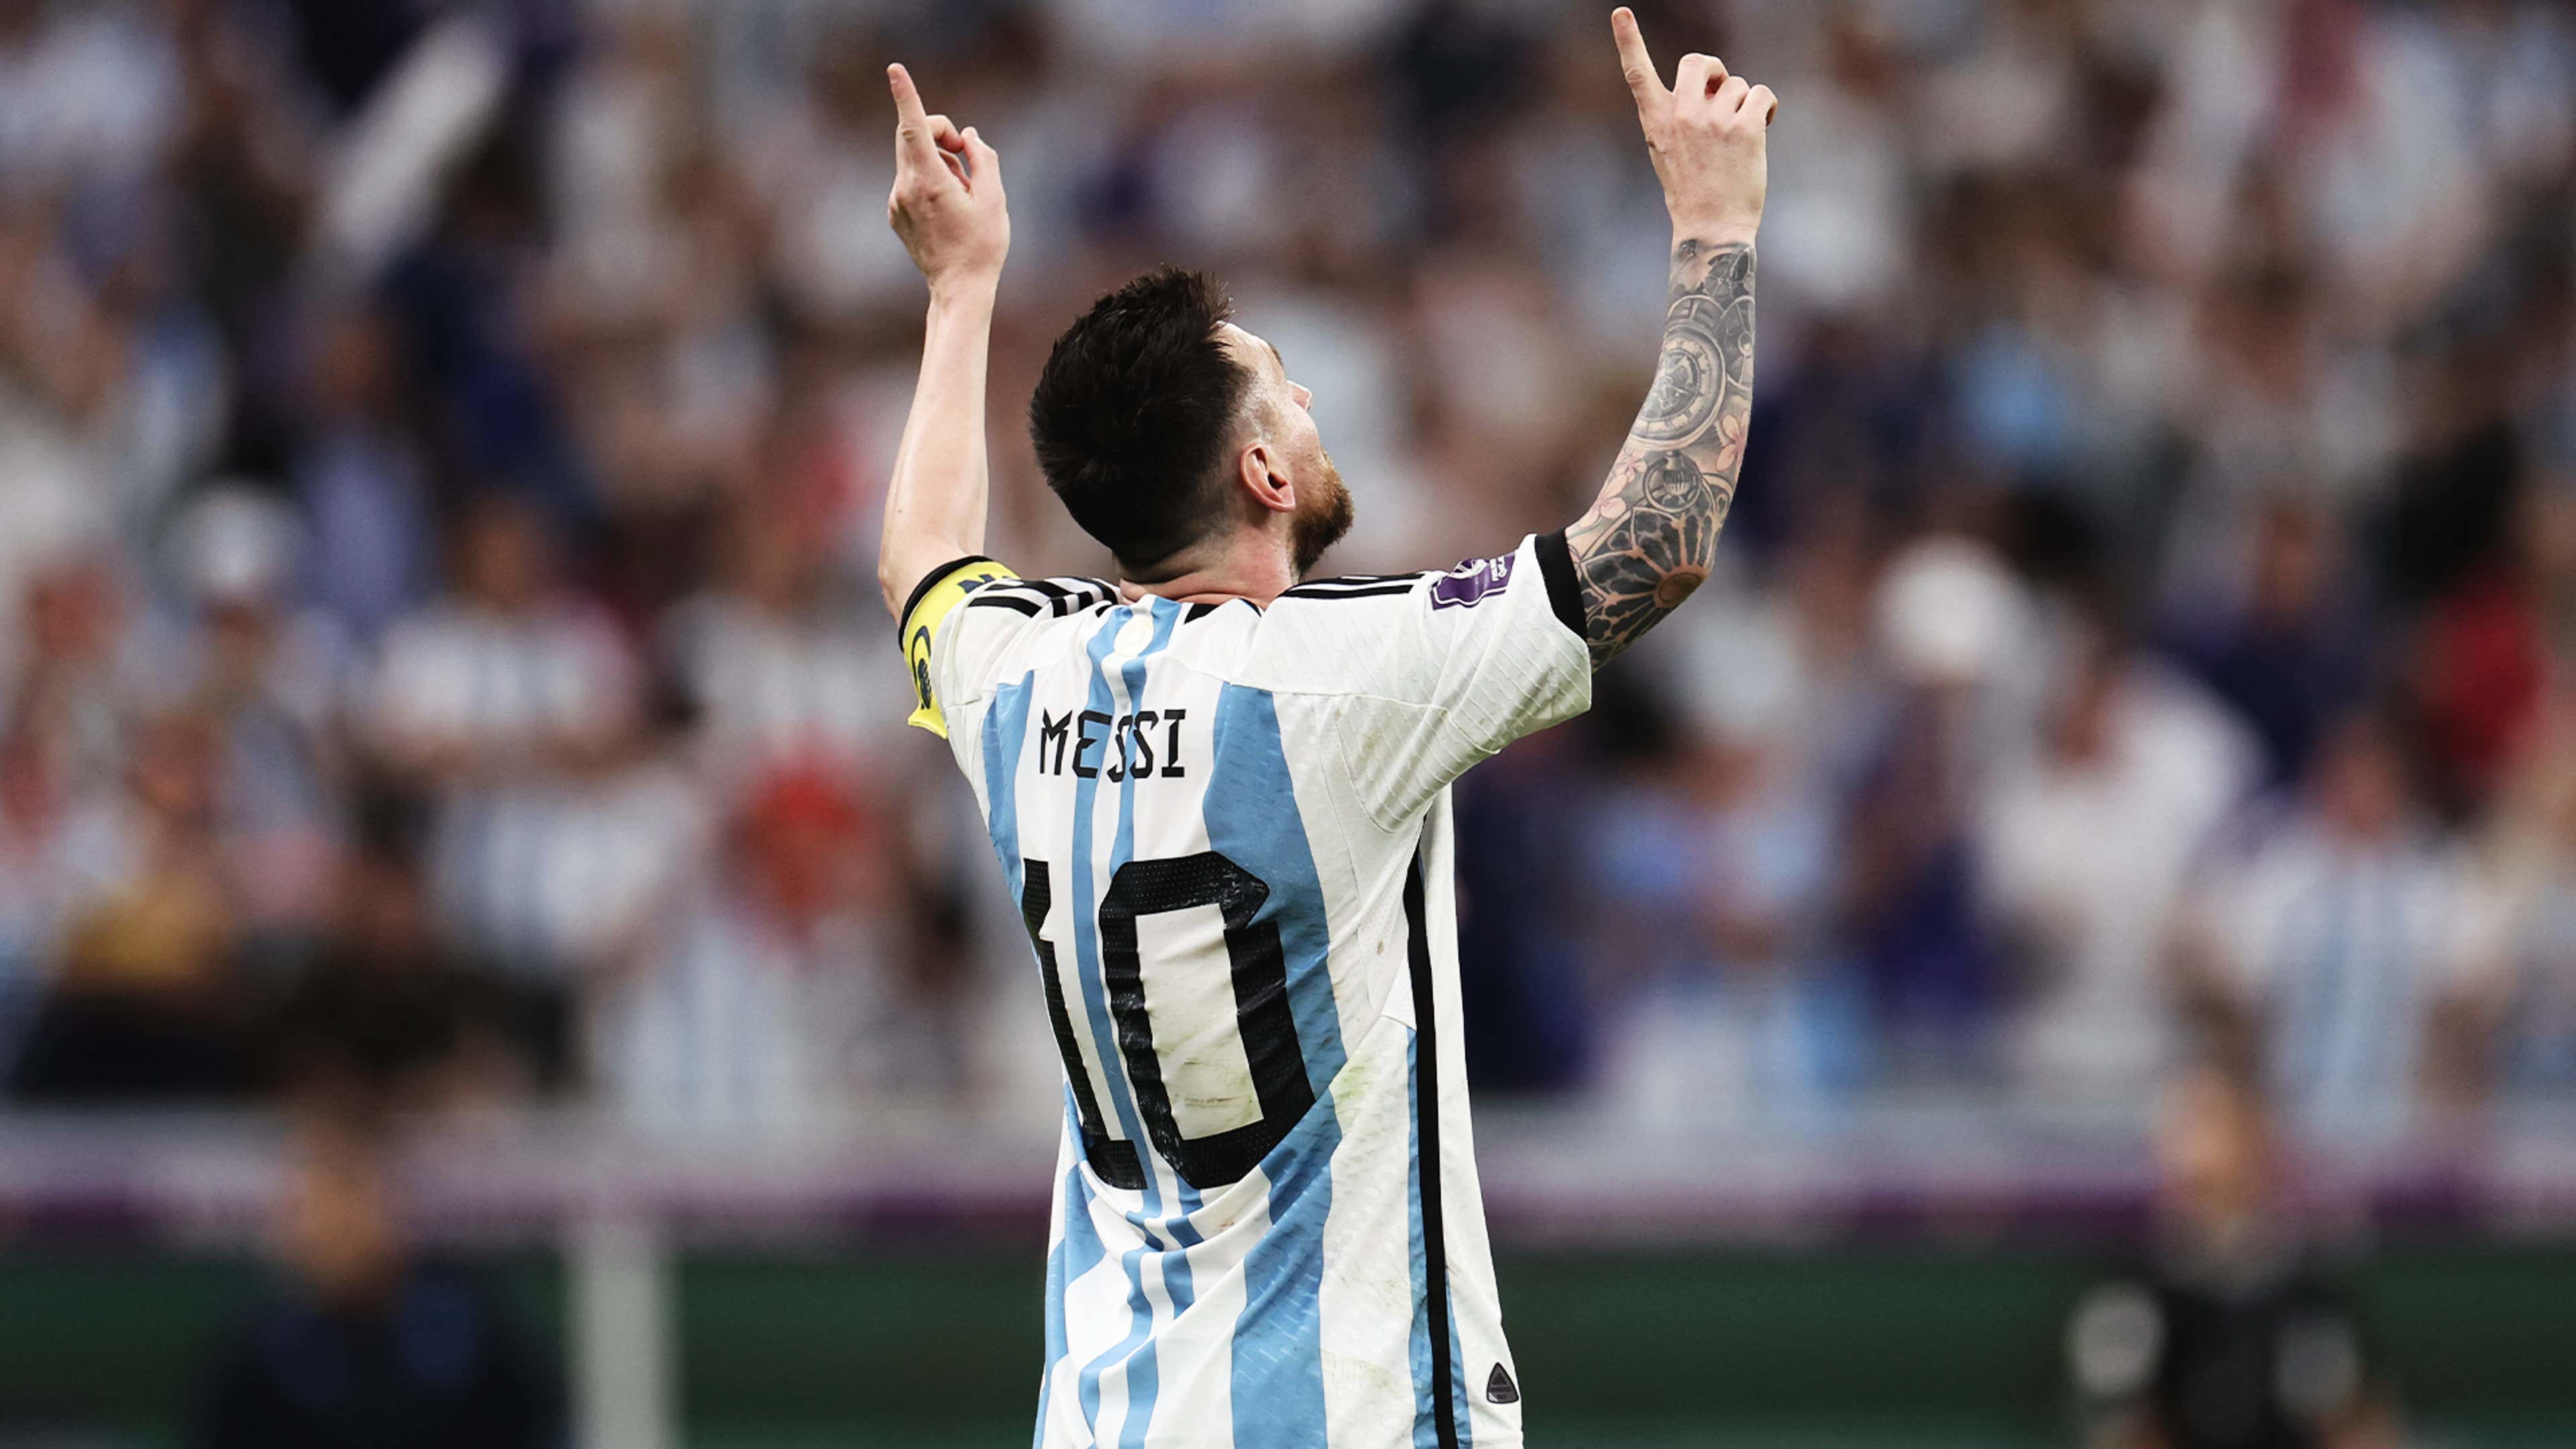 Buy Argentina 3 Star World Cup Home Kit, Messi Jersey